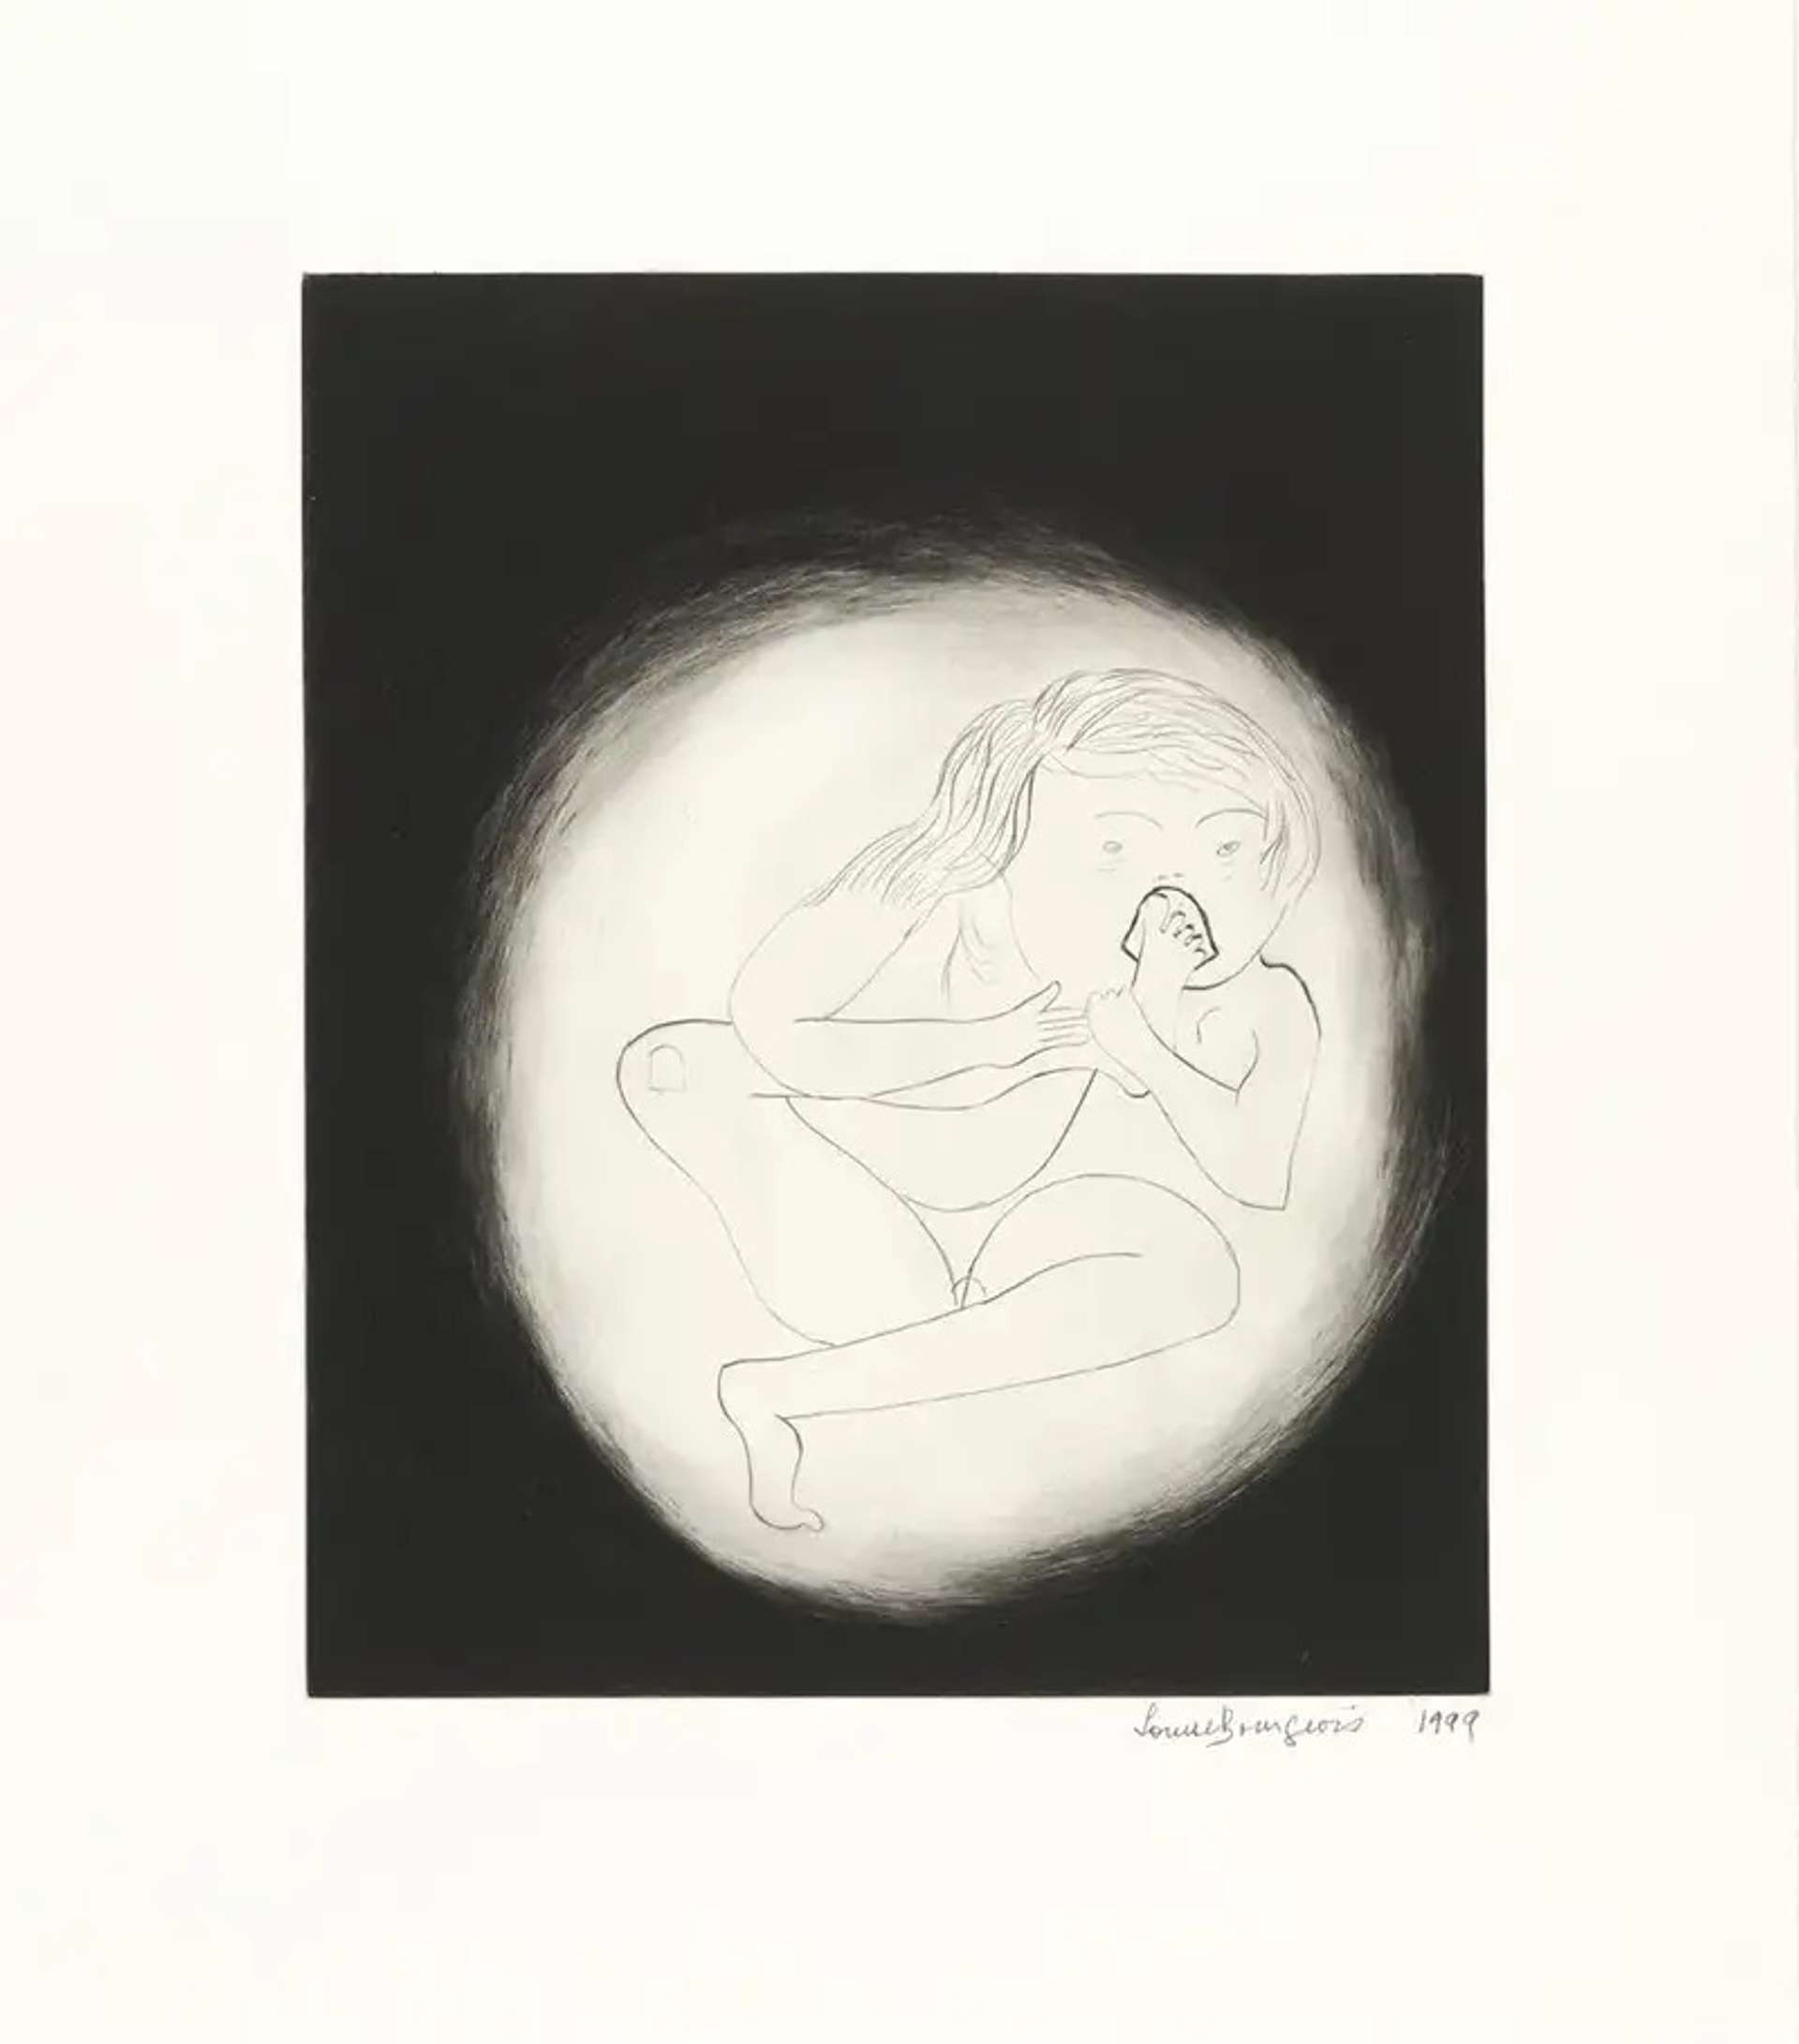  Louise Bourgeois’ Don’t Put Your Foot In Your Mouth. A drypoint of a woman in a dark corner putting her foot in her mouth.